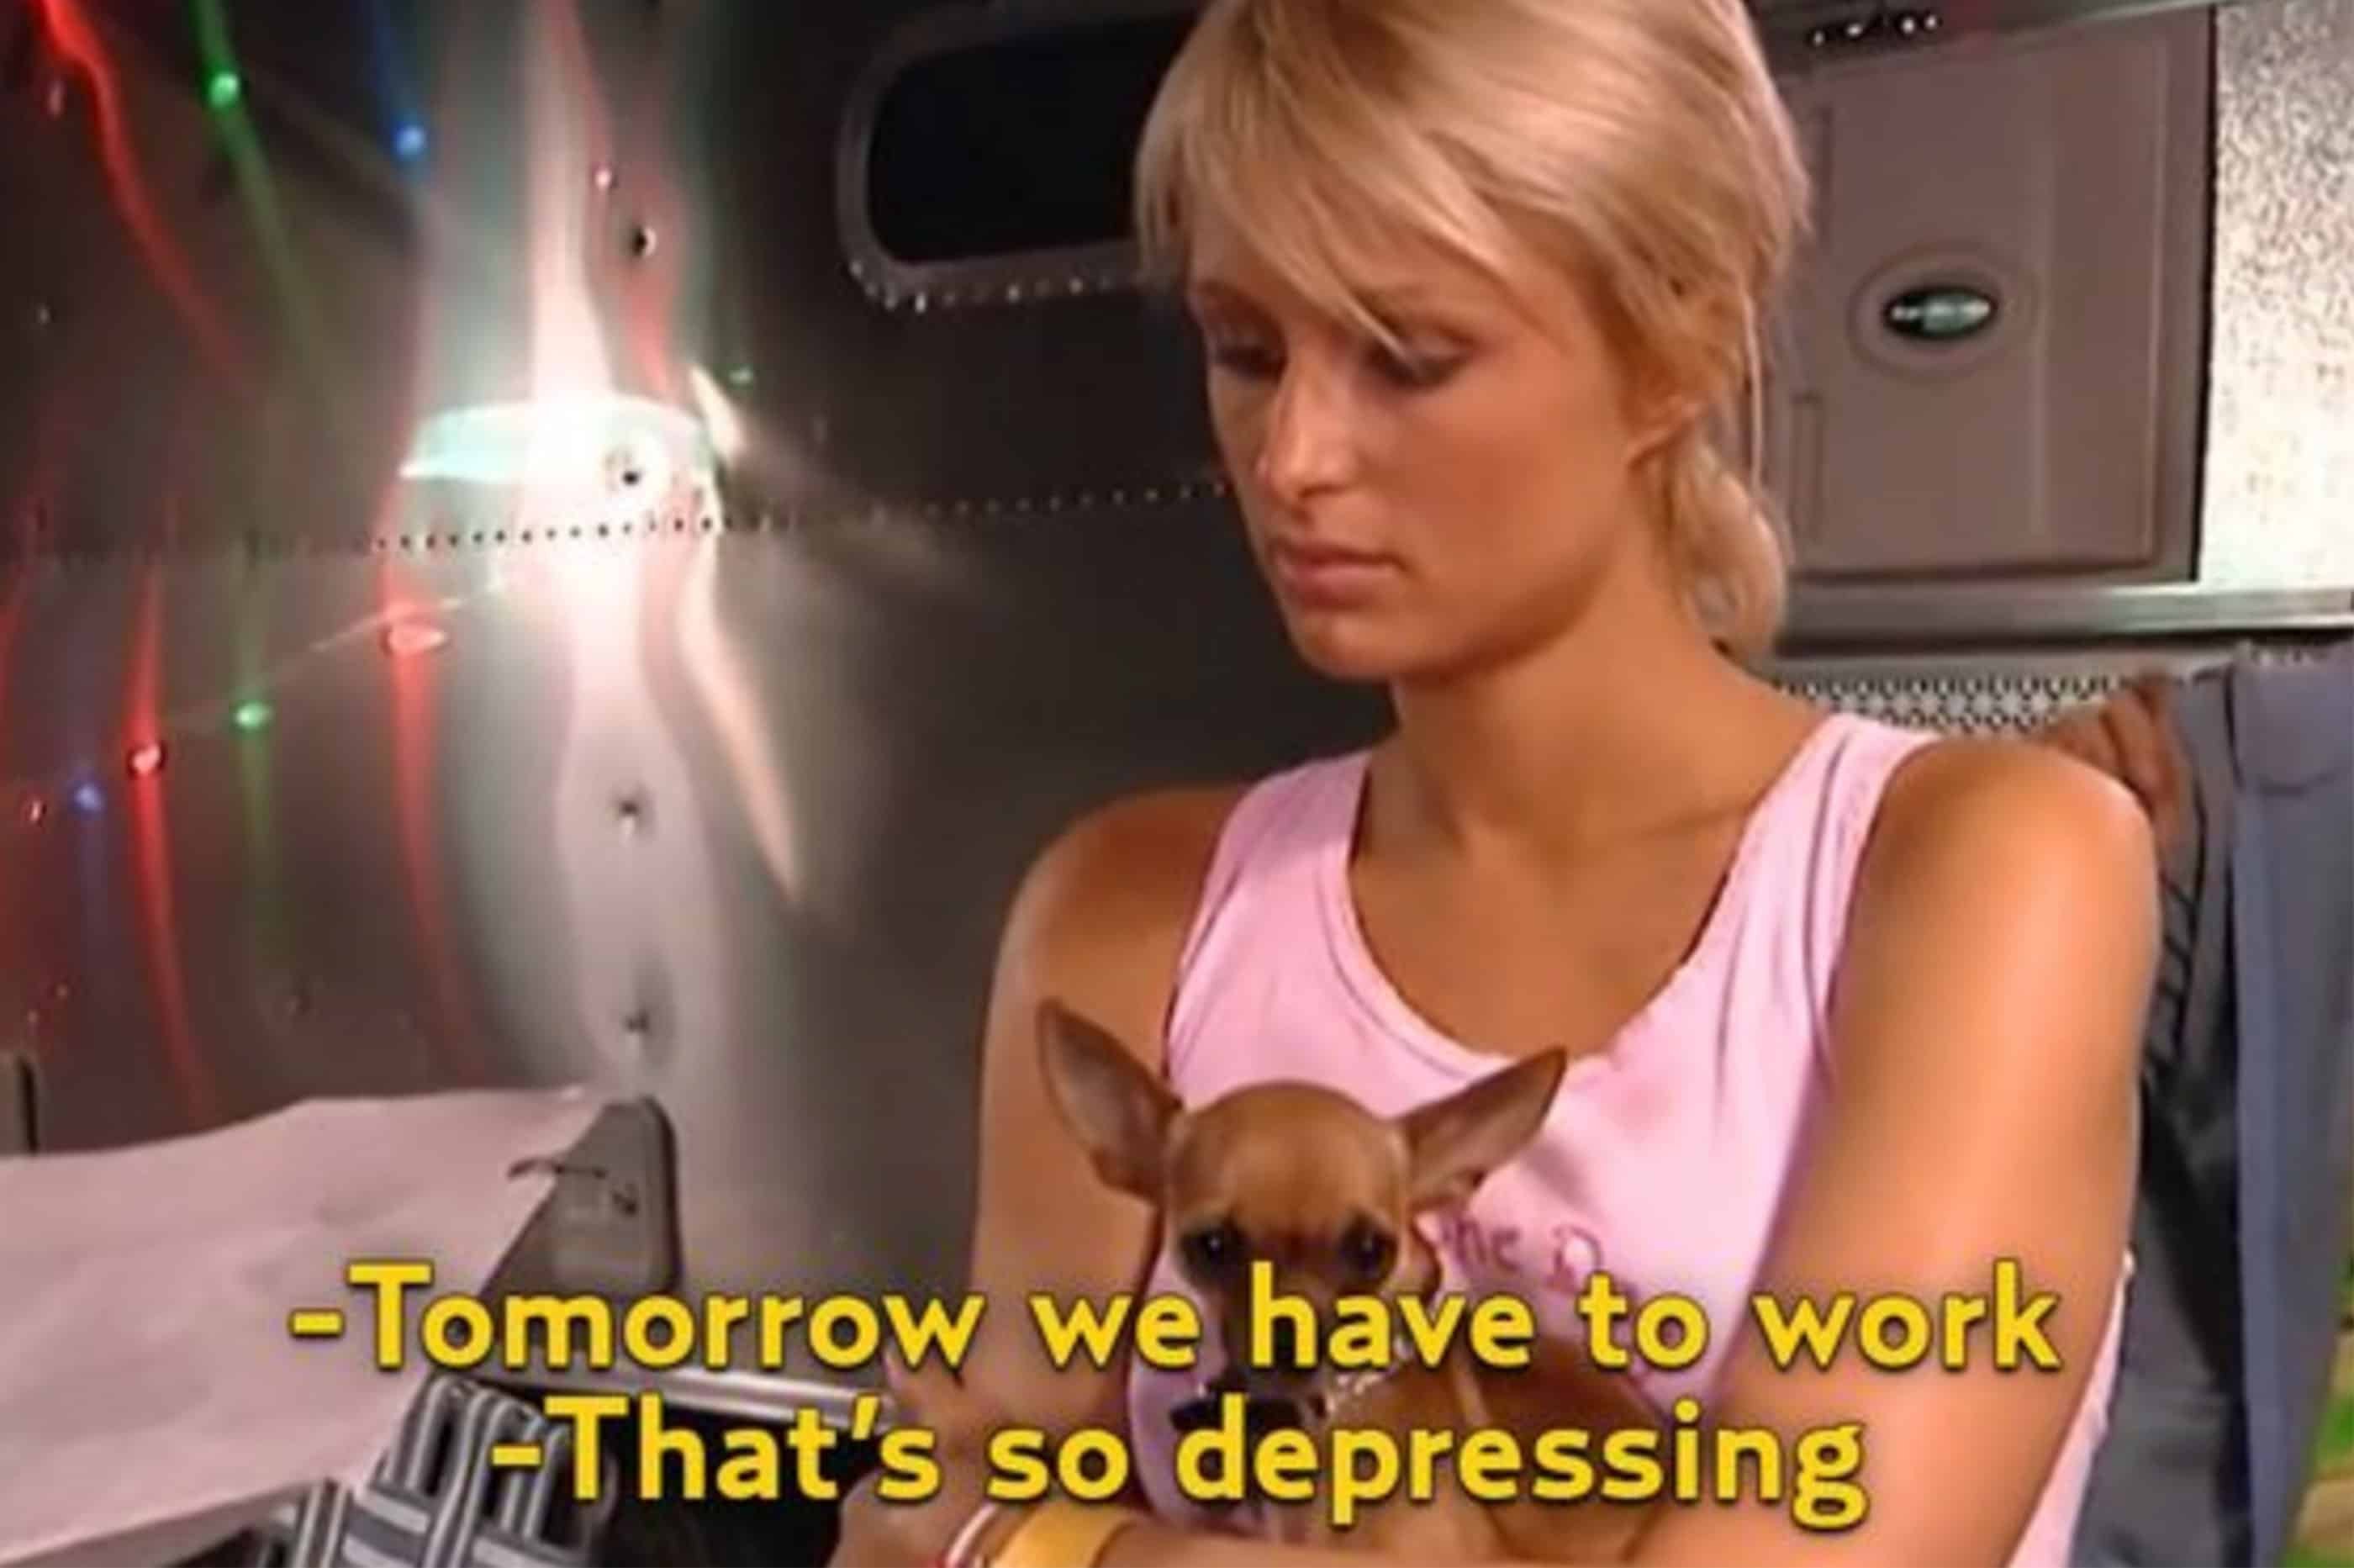 It's been 20 years since Paris Hilton and Nicole Richie took the world by storm with their iconic reality TV show 'The Simple Life'.